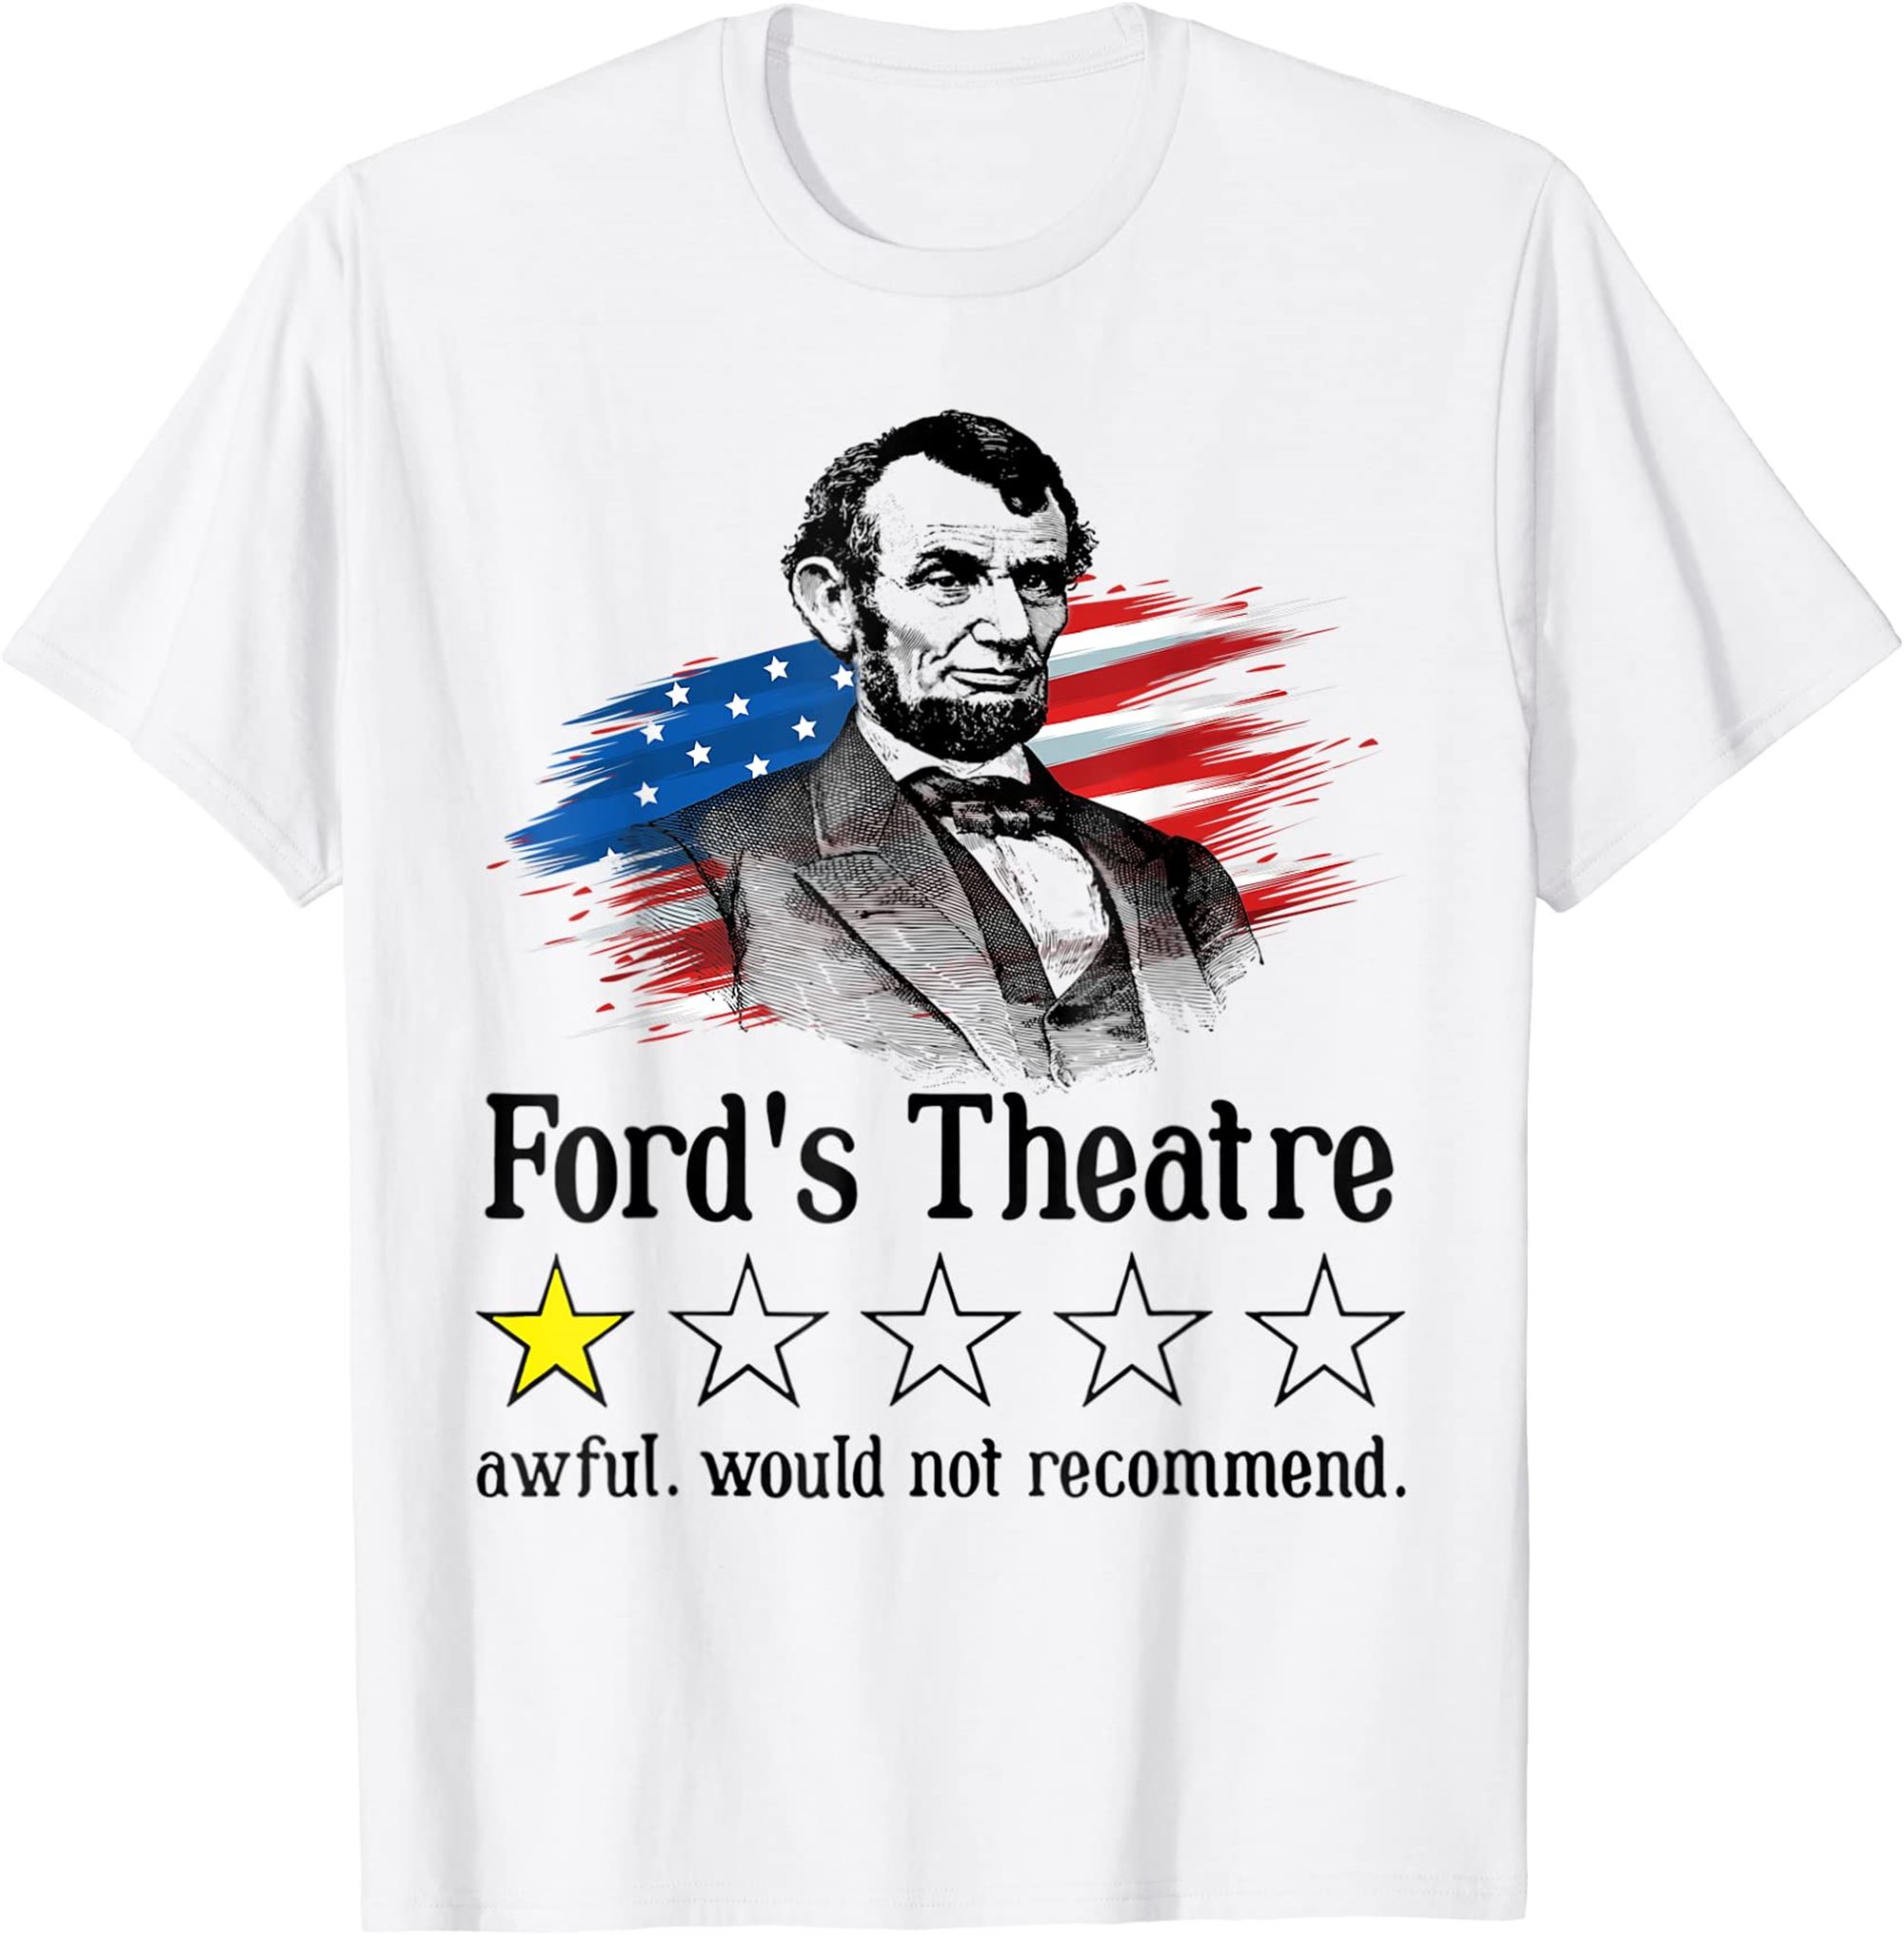 Fords Theatre Awful Would Not Recommend Review T-shirt Plus Size Up To 5xl